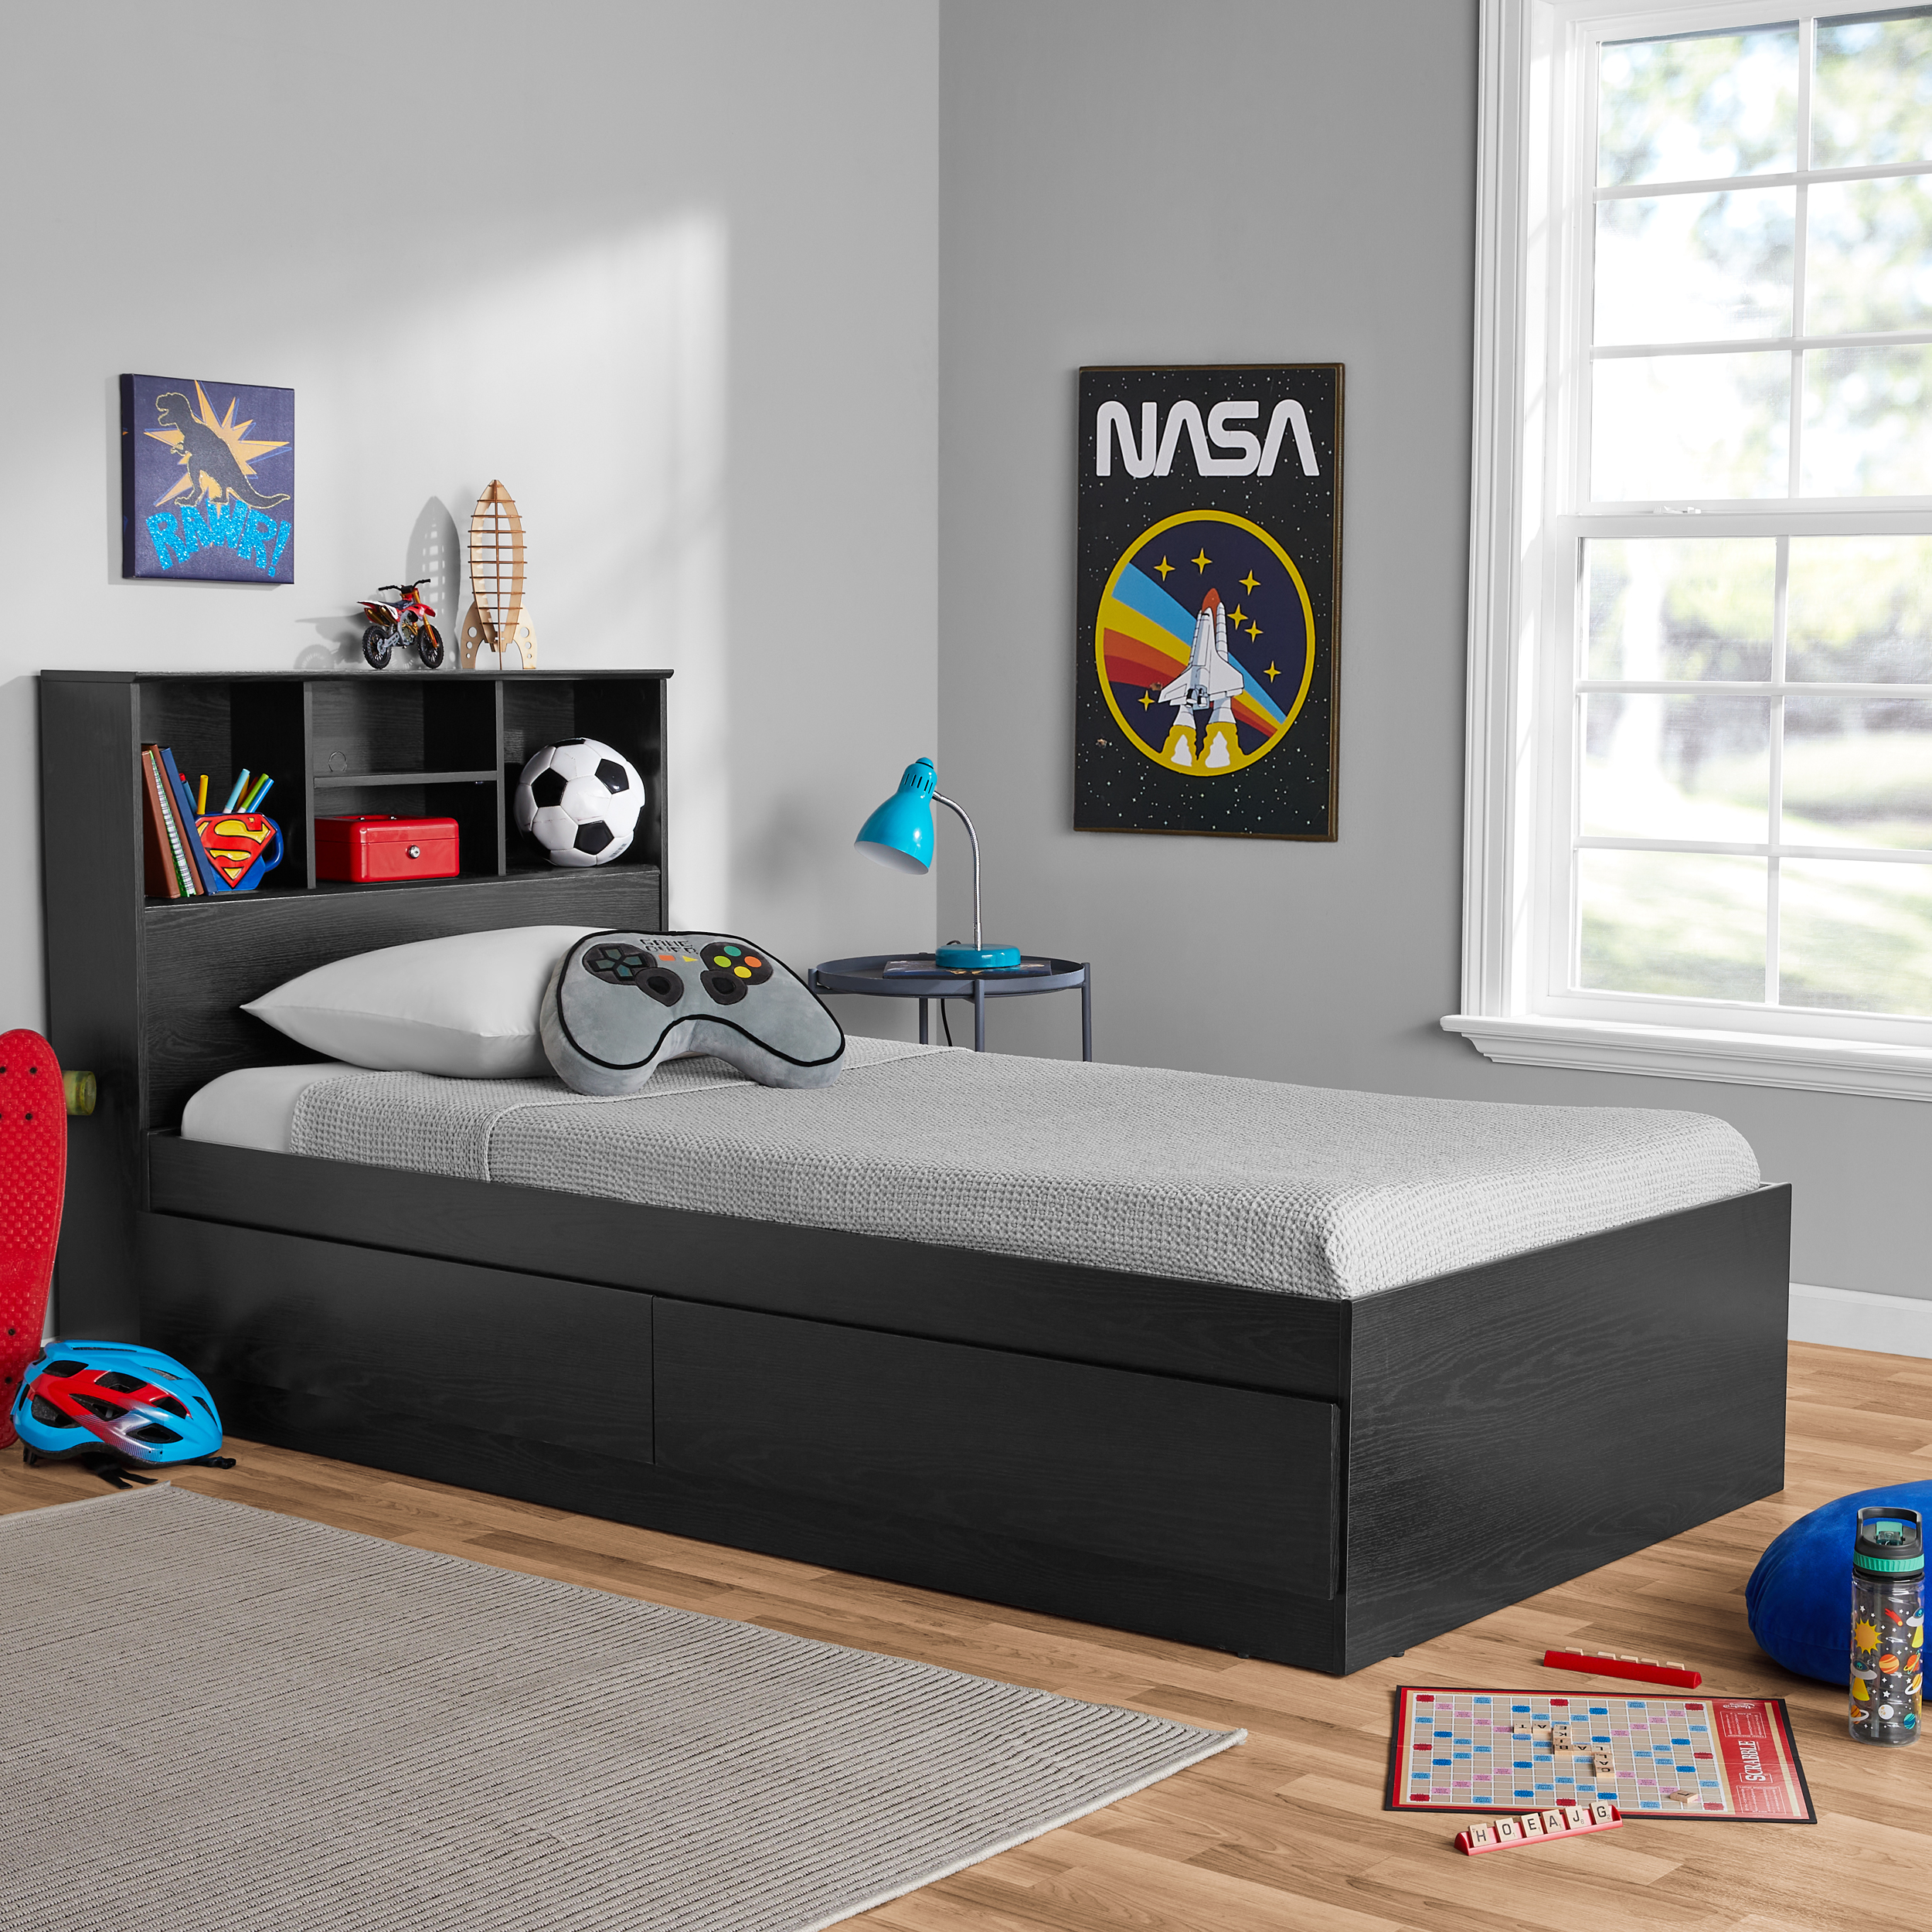 Your Zone Storage Bed with Bookcase Headboard, Twin, Bourbon Finish - image 1 of 10